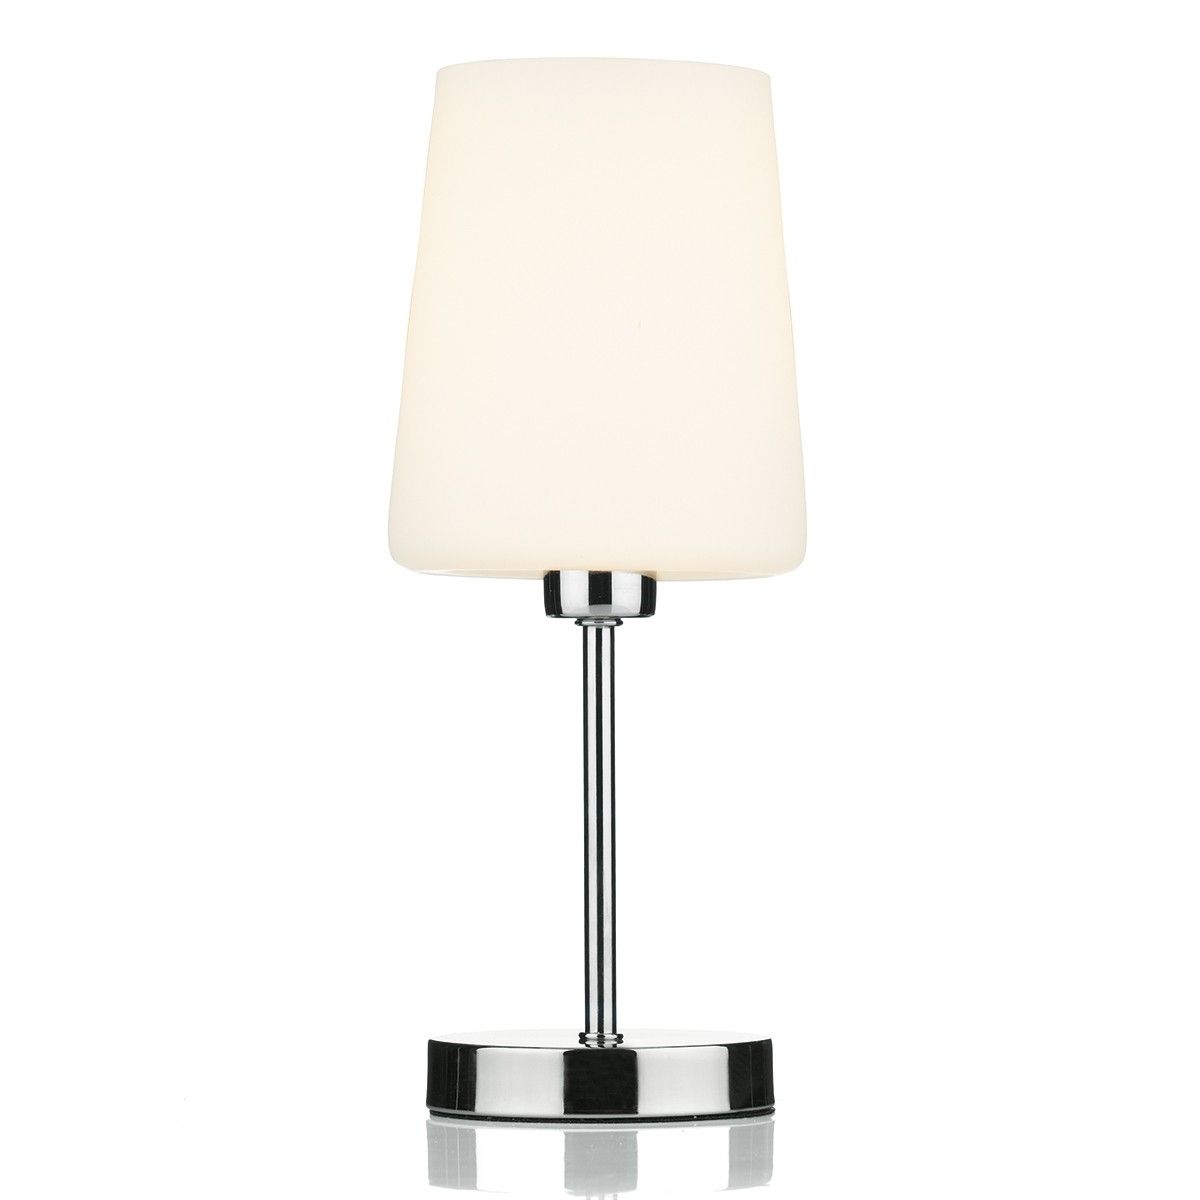 Lamp : Touch Table Lamps Bedroom Exciting For Living Room John Lewis Within Living Room Touch Table Lamps (View 2 of 15)